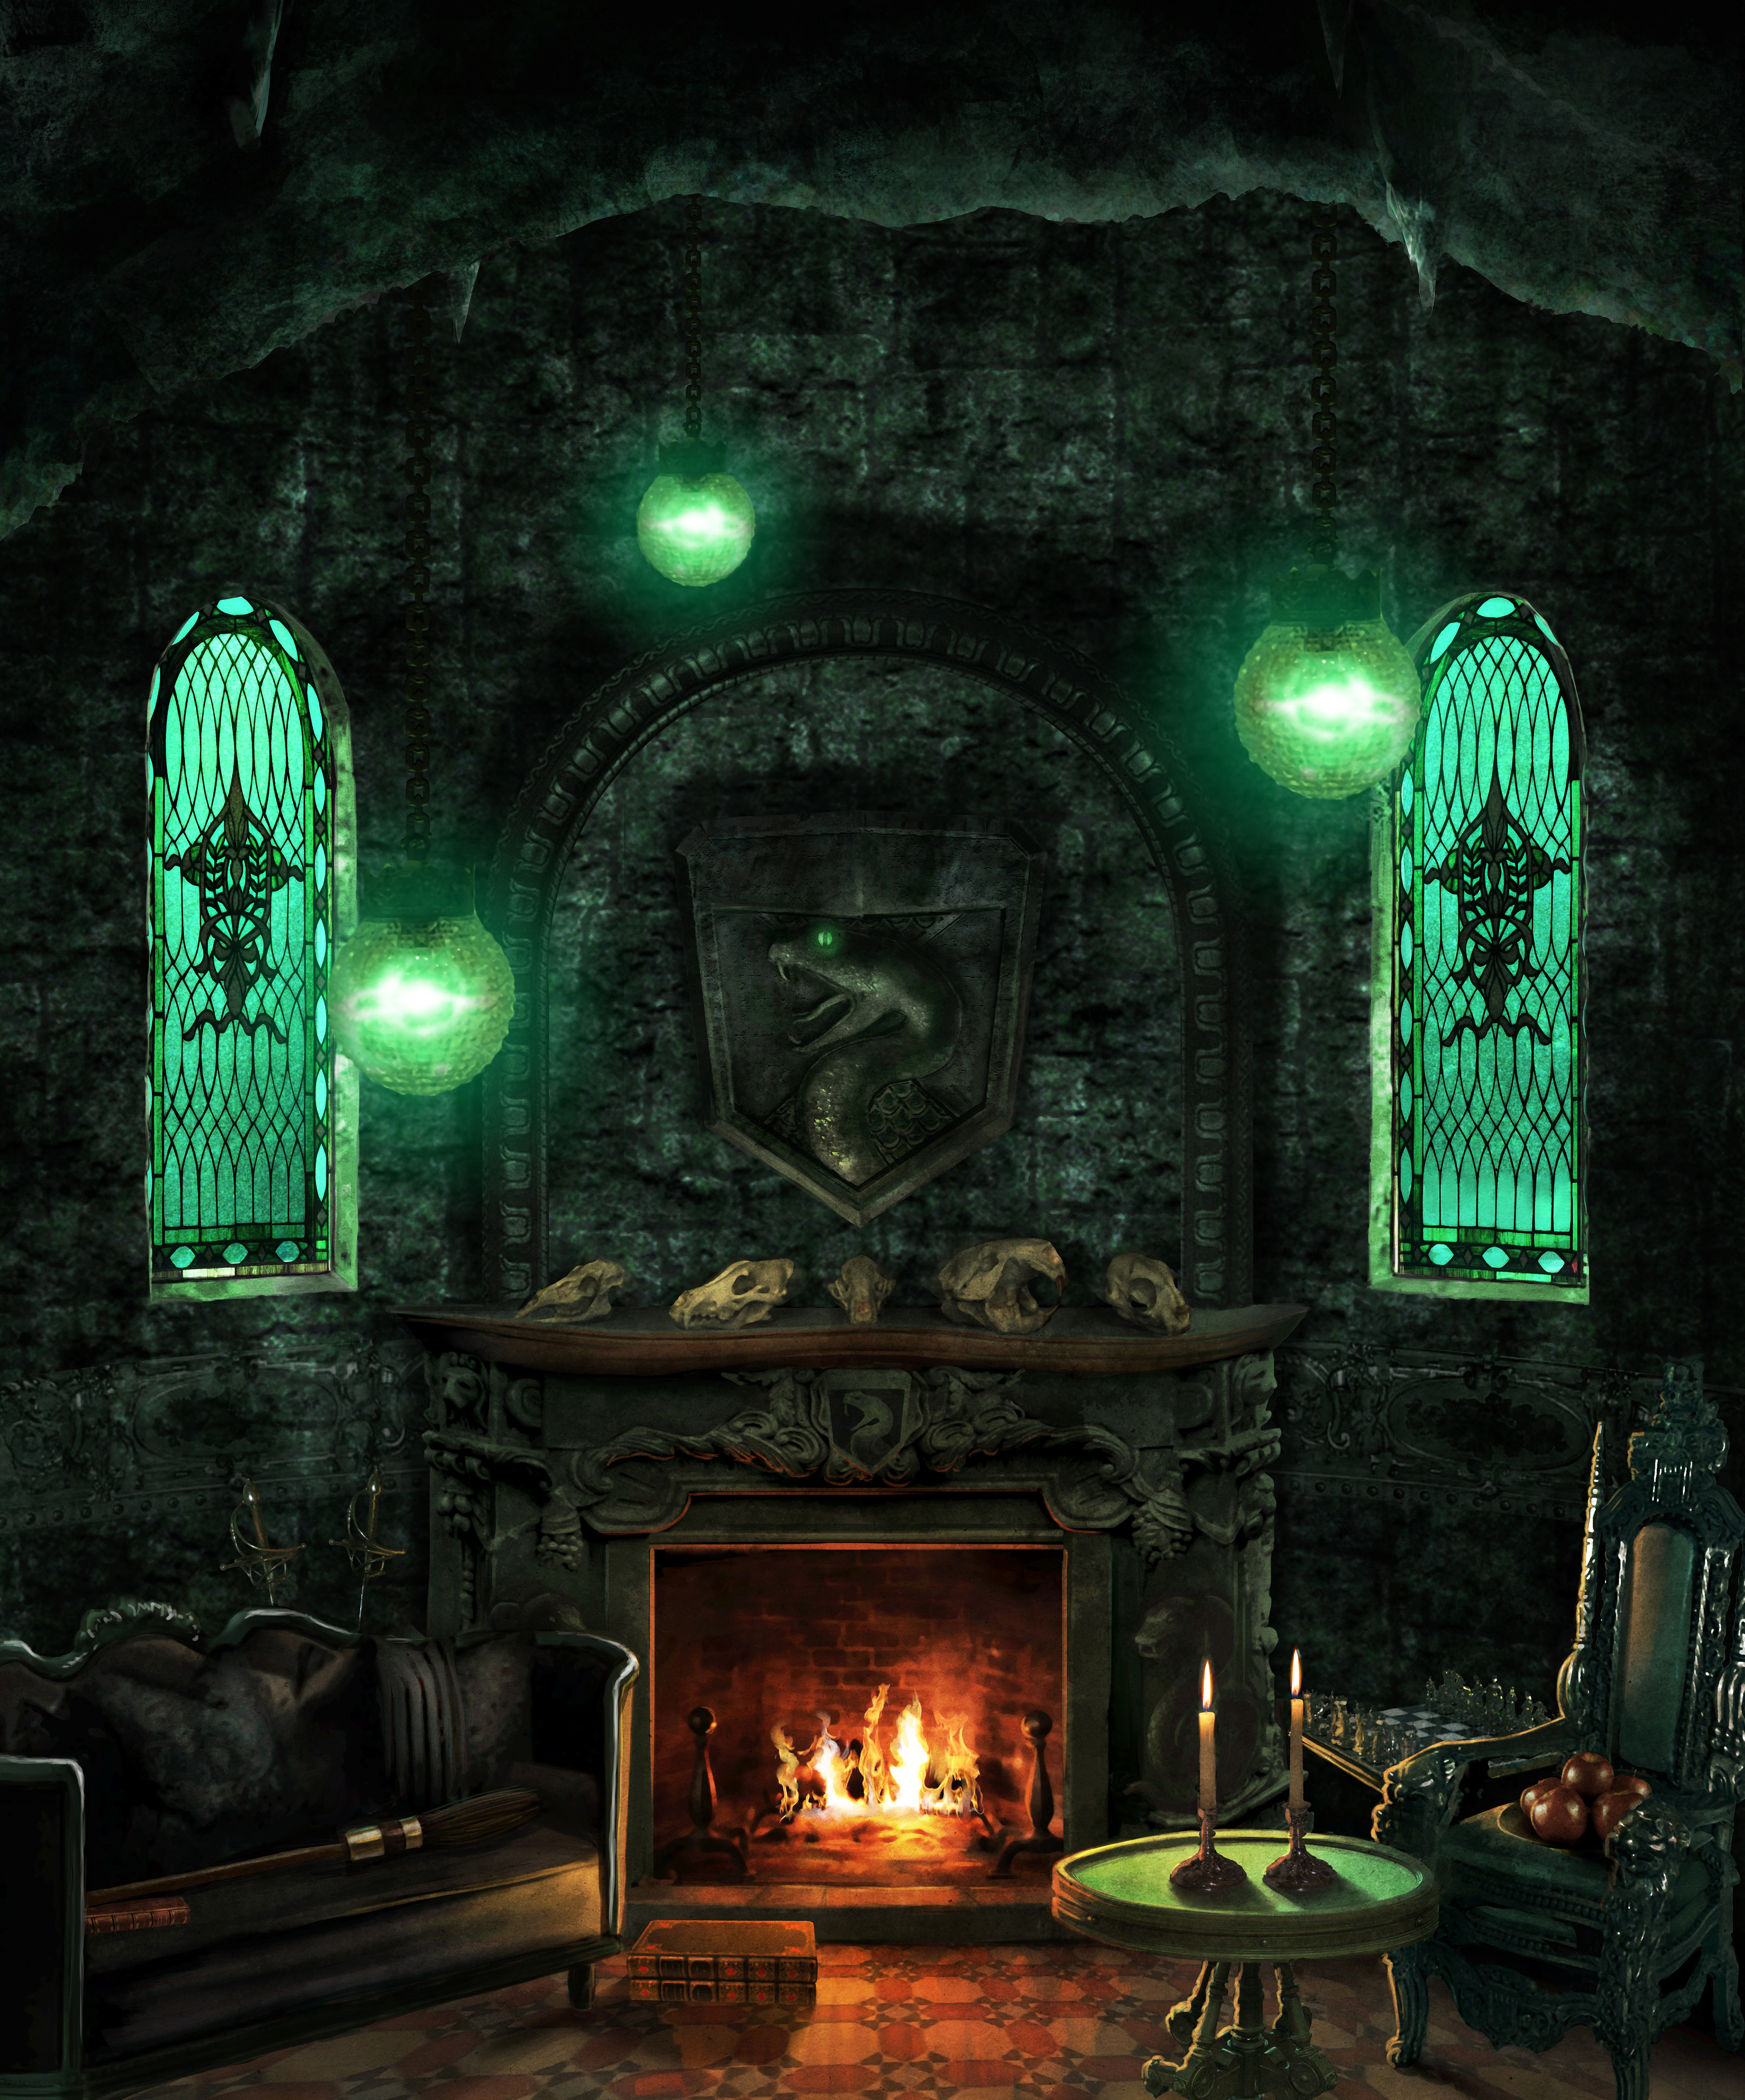 Slytherin Common Room from Pottermore